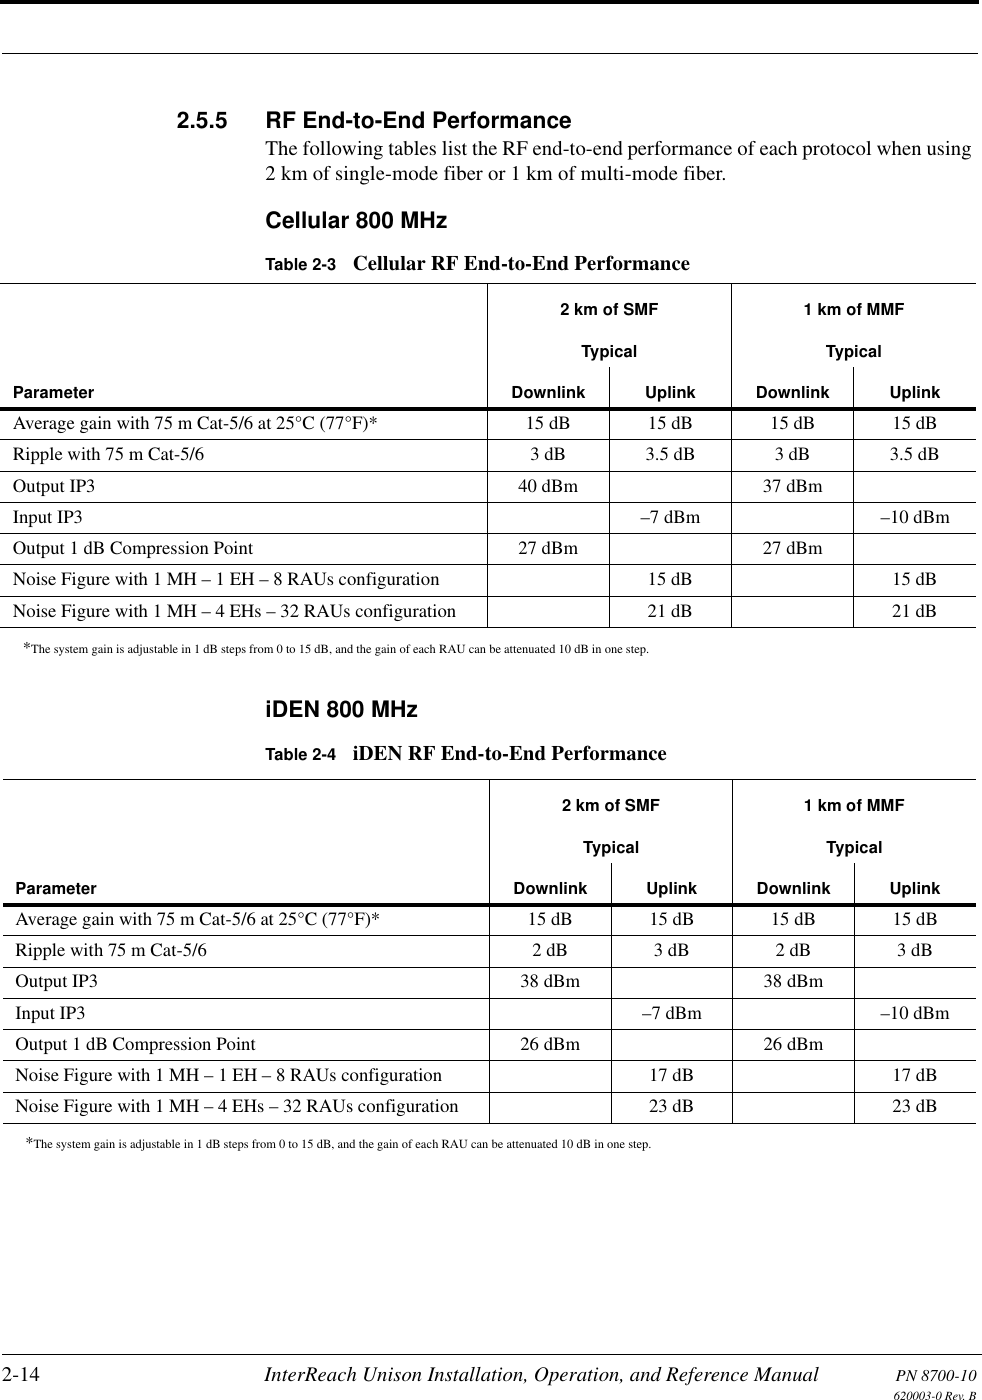 2-14 InterReach Unison Installation, Operation, and Reference Manual PN 8700-10620003-0 Rev. B2.5.5 RF End-to-End PerformanceThe following tables list the RF end-to-end performance of each protocol when using 2 km of single-mode fiber or 1 km of multi-mode fiber.Cellular 800 MHziDEN 800 MHzTable 2-3 Cellular RF End-to-End PerformanceParameter2 km of SMF 1 km of MMFTypical TypicalDownlink Uplink Downlink UplinkAverage gain with 75 m Cat-5/6 at 25°C (77°F)**The system gain is adjustable in 1 dB steps from 0 to 15 dB, and the gain of each RAU can be attenuated 10 dB in one step.15 dB 15 dB 15 dB 15 dBRipple with 75 m Cat-5/6  3 dB 3.5 dB 3 dB 3.5 dBOutput IP3 40 dBm 37 dBmInput IP3 –7 dBm –10 dBmOutput 1 dB Compression Point 27 dBm 27 dBmNoise Figure with 1 MH – 1 EH – 8 RAUs configuration 15 dB 15 dBNoise Figure with 1 MH – 4 EHs – 32 RAUs configuration 21 dB 21 dBTable 2-4 iDEN RF End-to-End PerformanceParameter2 km of SMF 1 km of MMFTypical TypicalDownlink Uplink Downlink UplinkAverage gain with 75 m Cat-5/6 at 25°C (77°F)**The system gain is adjustable in 1 dB steps from 0 to 15 dB, and the gain of each RAU can be attenuated 10 dB in one step.15 dB 15 dB 15 dB 15 dBRipple with 75 m Cat-5/6  2 dB 3 dB 2 dB 3 dBOutput IP3  38 dBm 38 dBmInput IP3  –7 dBm –10 dBmOutput 1 dB Compression Point 26 dBm 26 dBmNoise Figure with 1 MH – 1 EH – 8 RAUs configuration 17 dB 17 dBNoise Figure with 1 MH – 4 EHs – 32 RAUs configuration 23 dB 23 dB